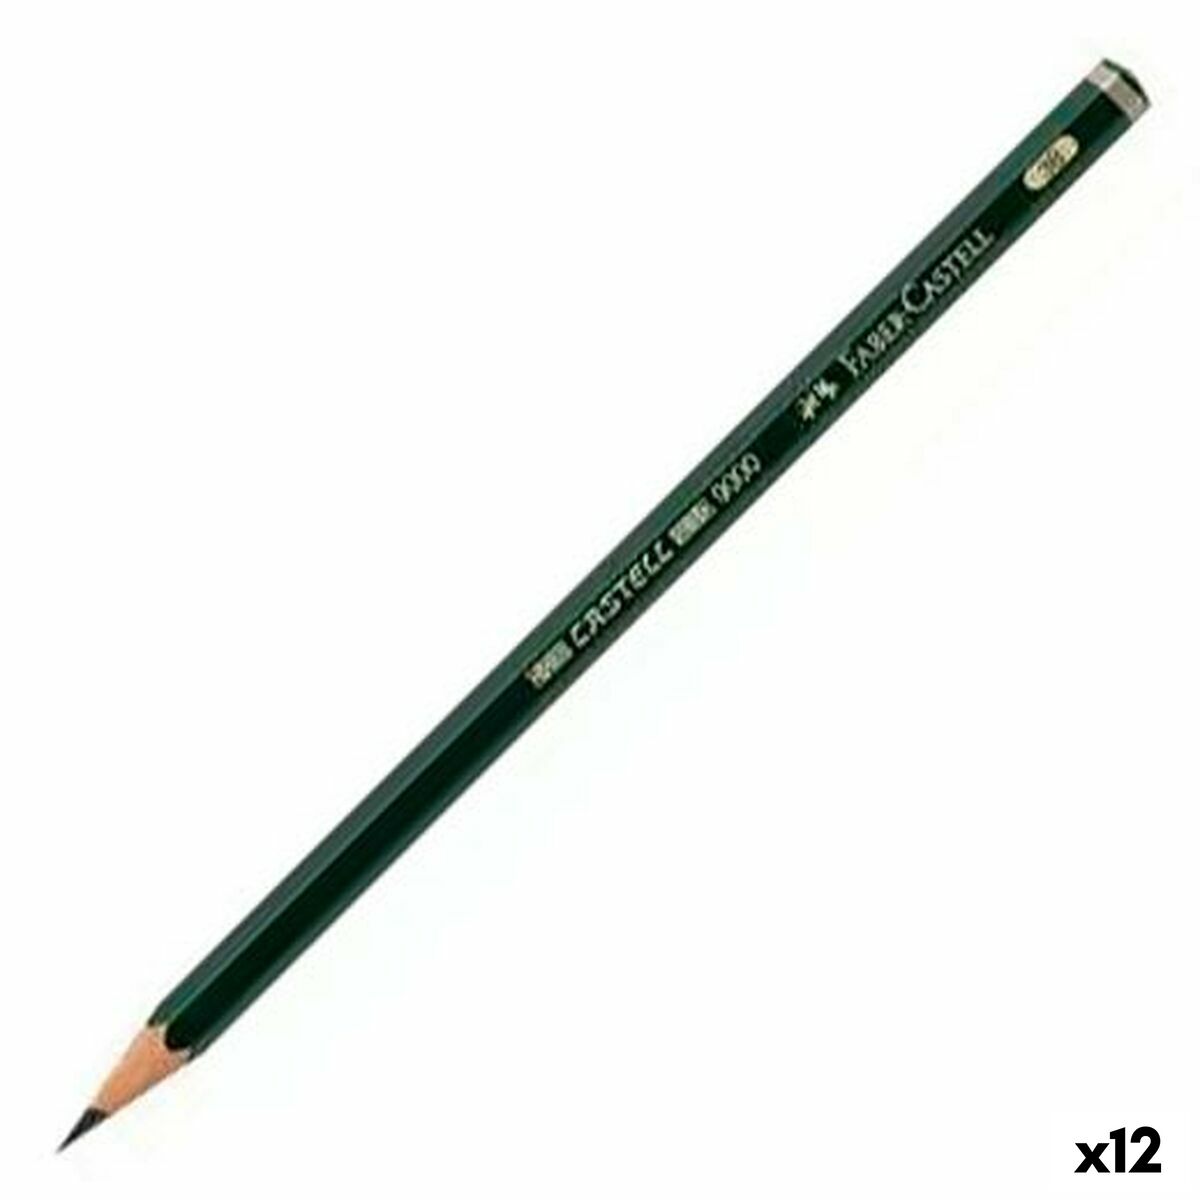 Pencil Faber-Castell 9000 Ecological 3B (12 Units)